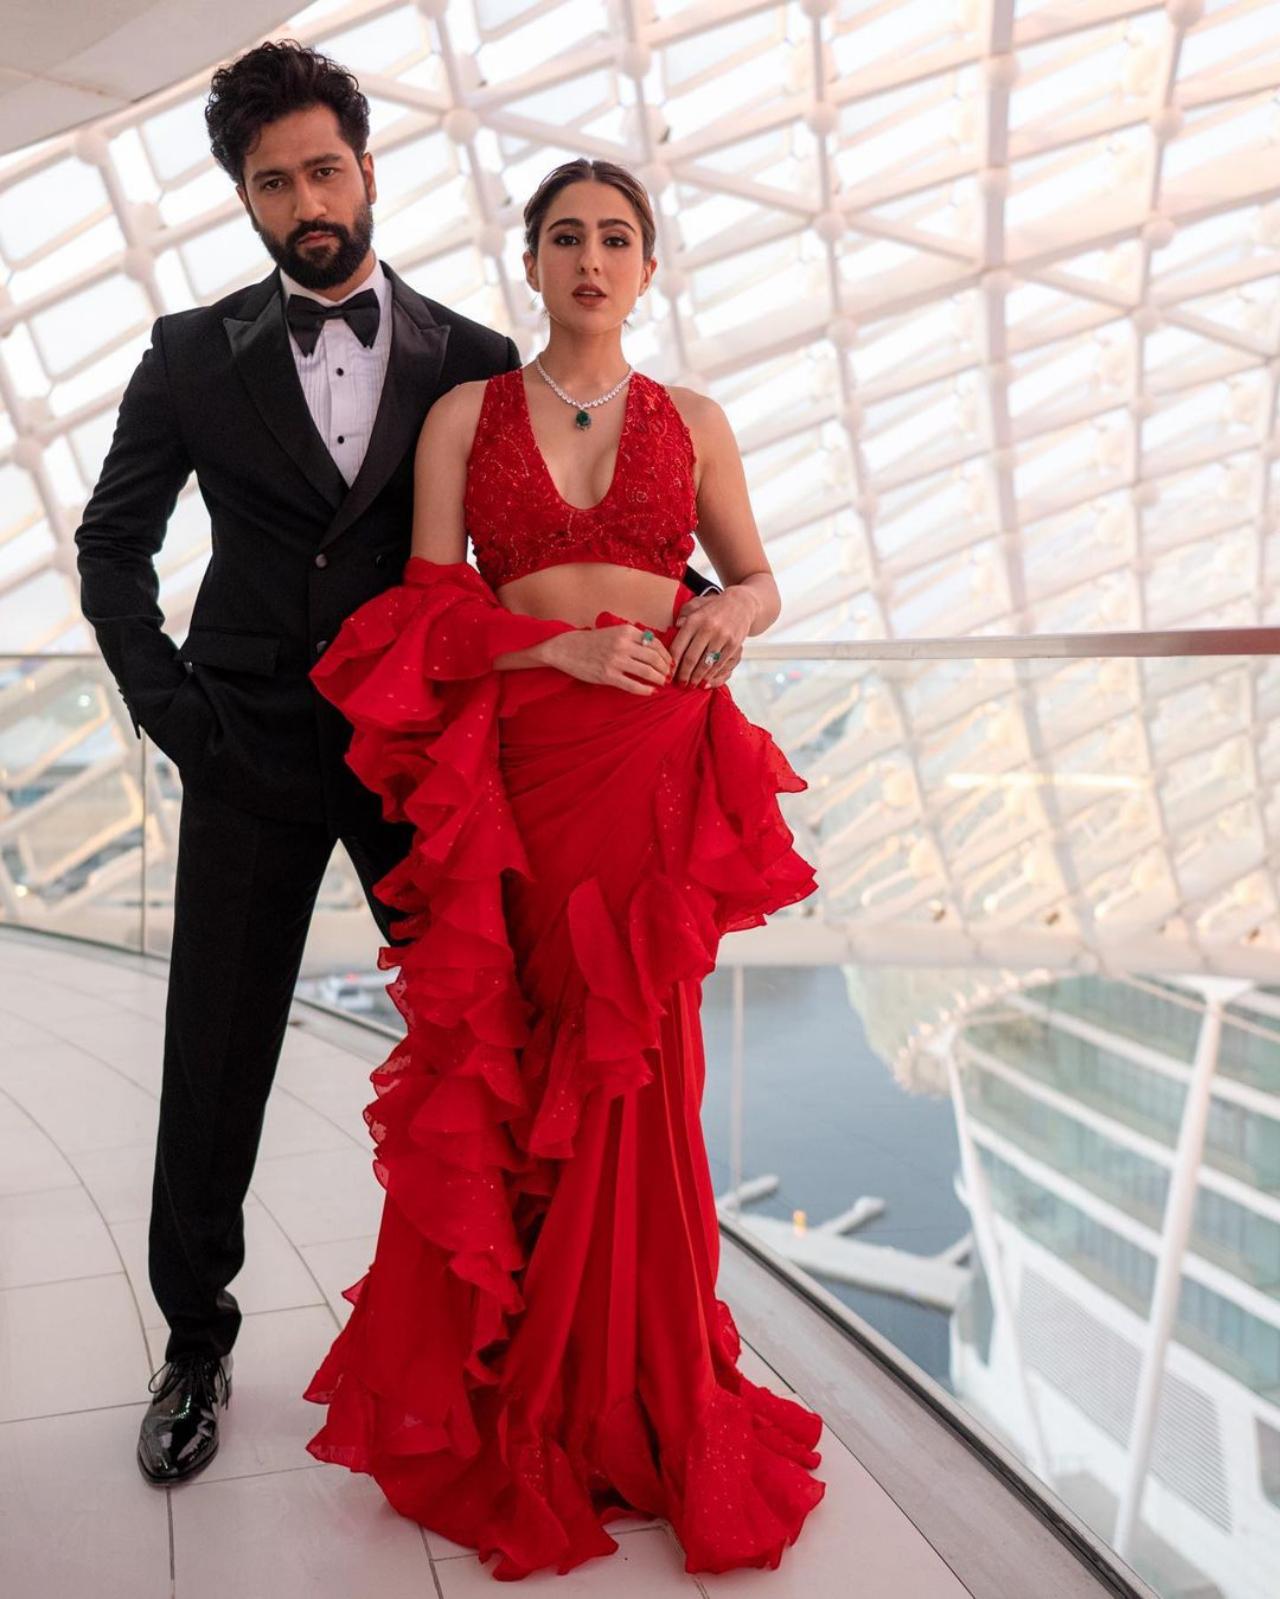 Actors Vicky Kaushal and Sara Ali Khan, who are currently promoting their latest offering 'Zara Hatke Zara Bachke', set the night ablaze as they appeared at the Awards night together. 